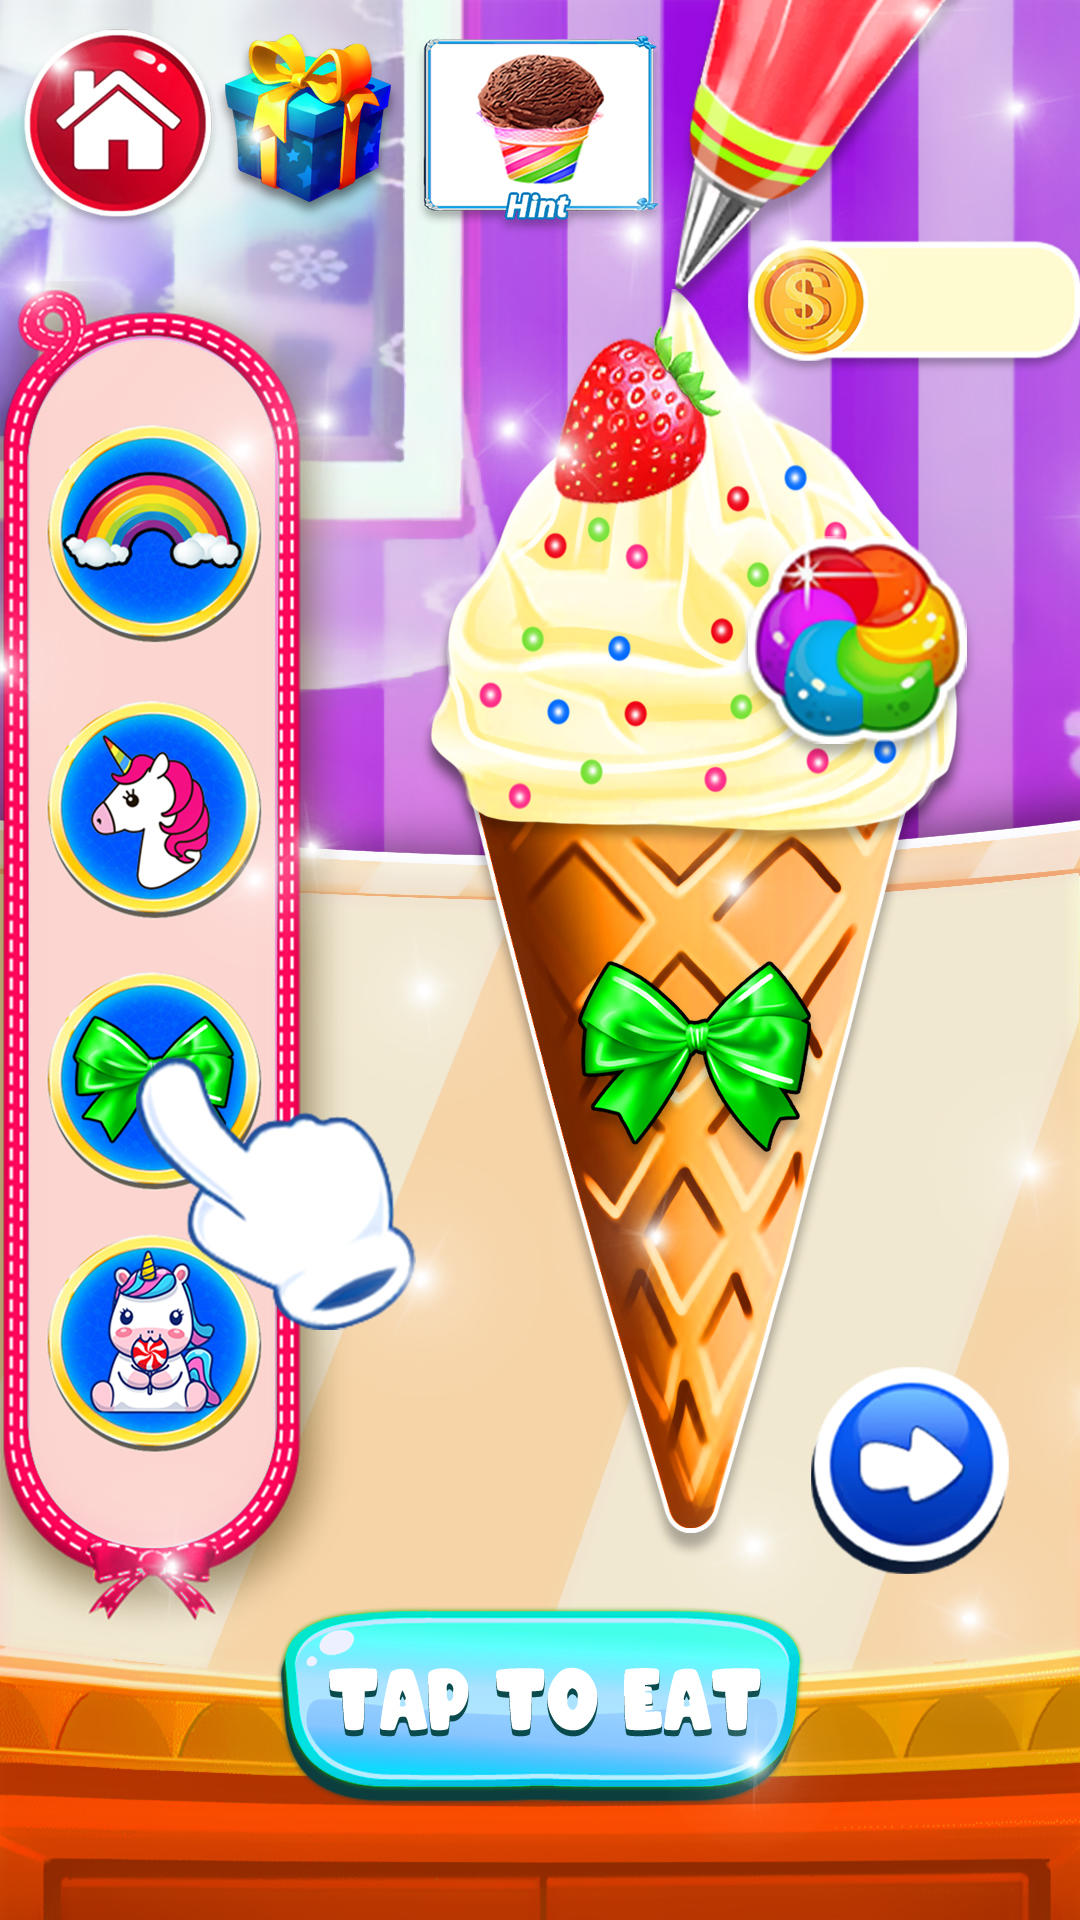 Ice Cream Games-Icecream Maker - APK Download for Android